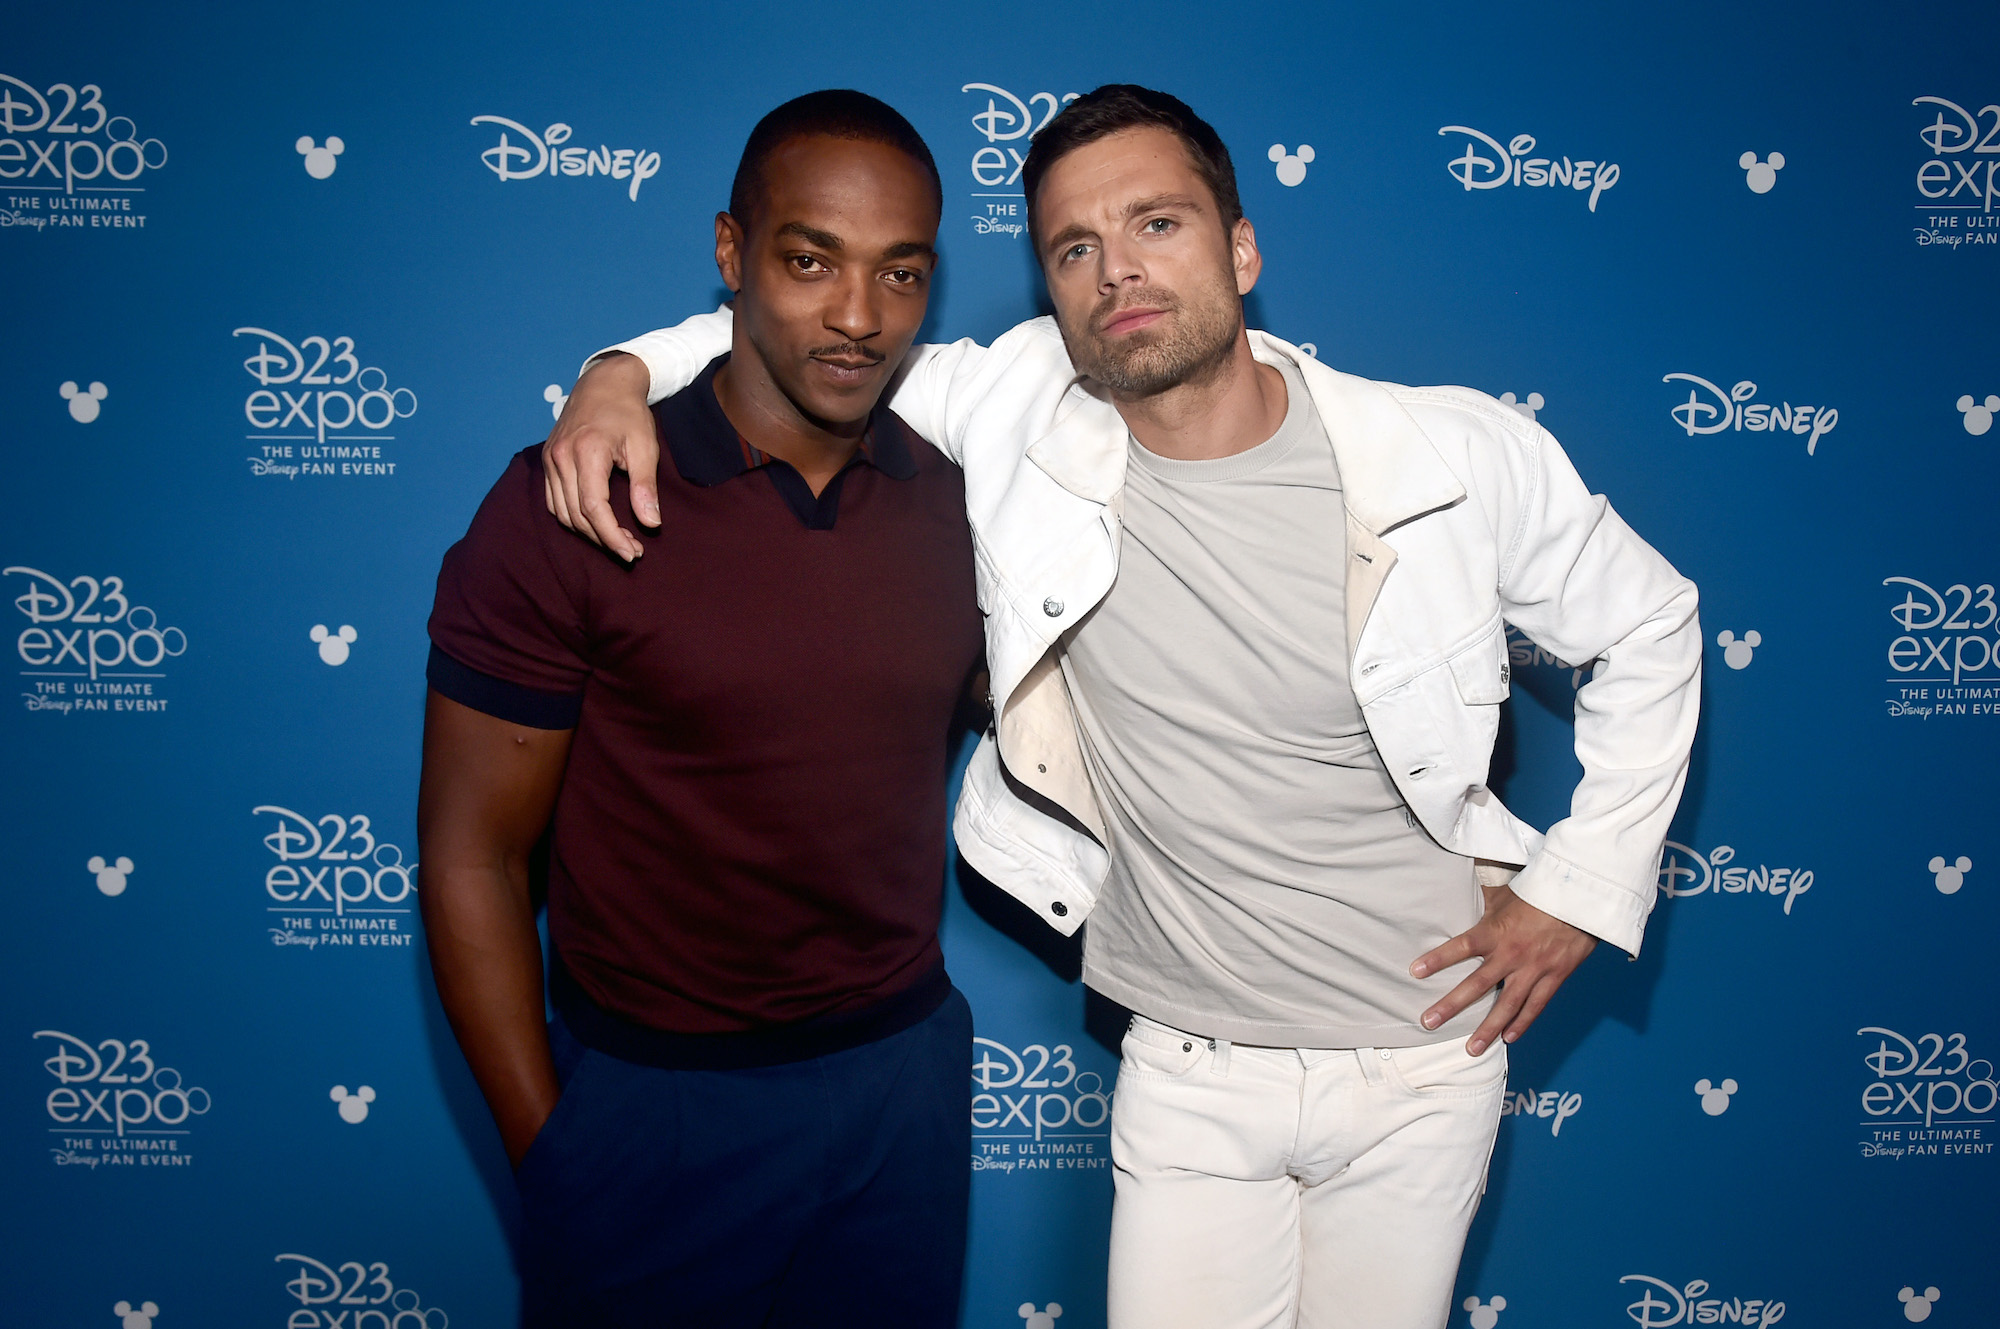 (L-R) Anthony Mackie and Sebastian Stan in front of a blue background with repeating logos